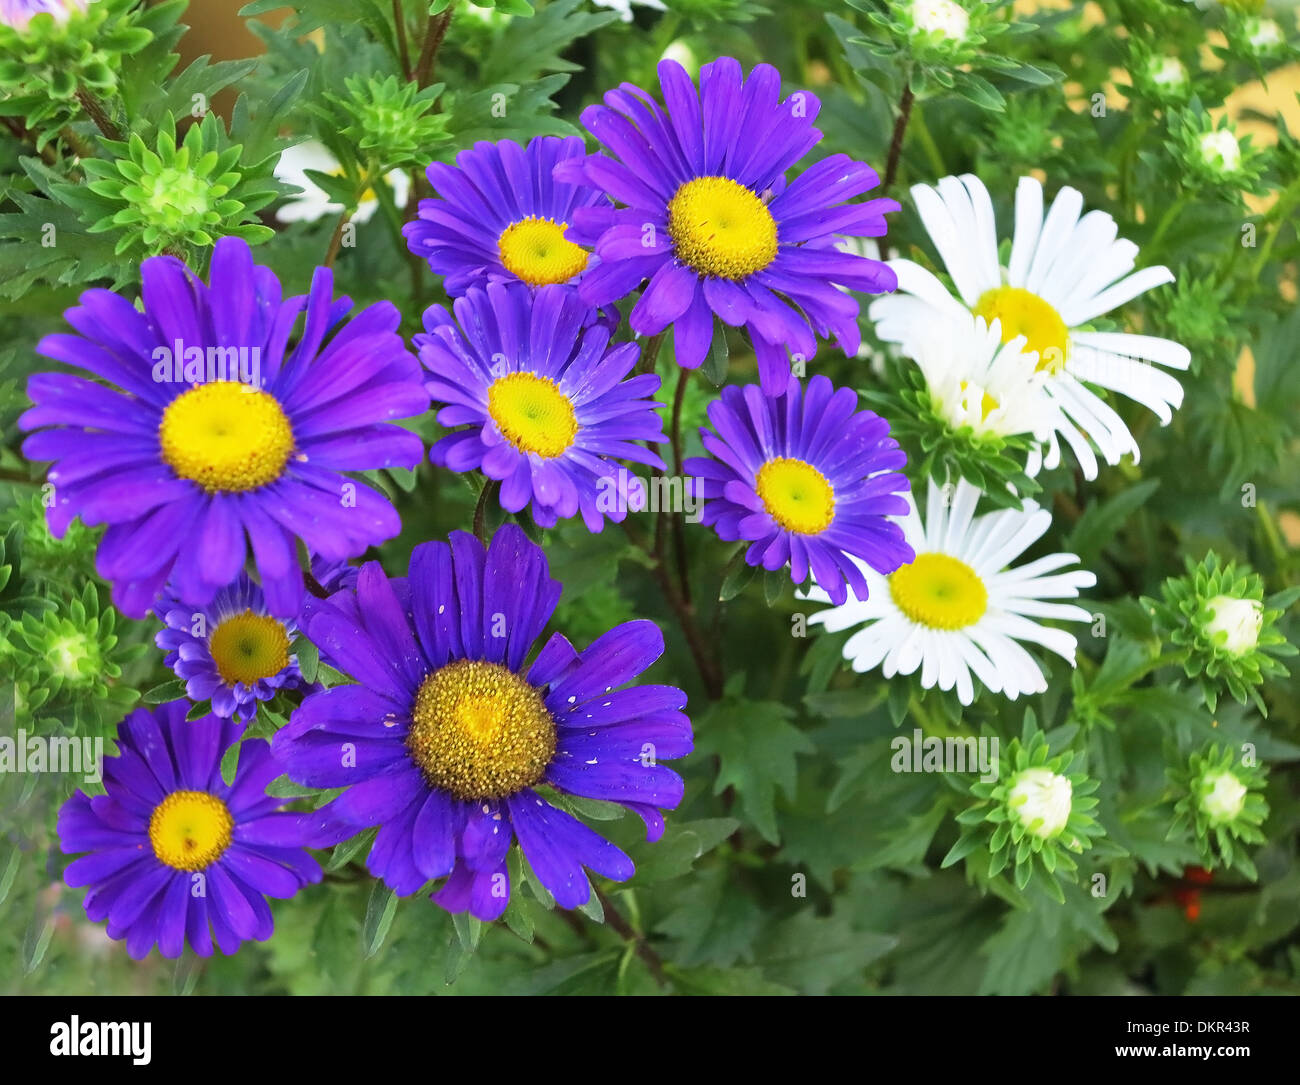 Blue and white Daisies in the garden Stock Photo